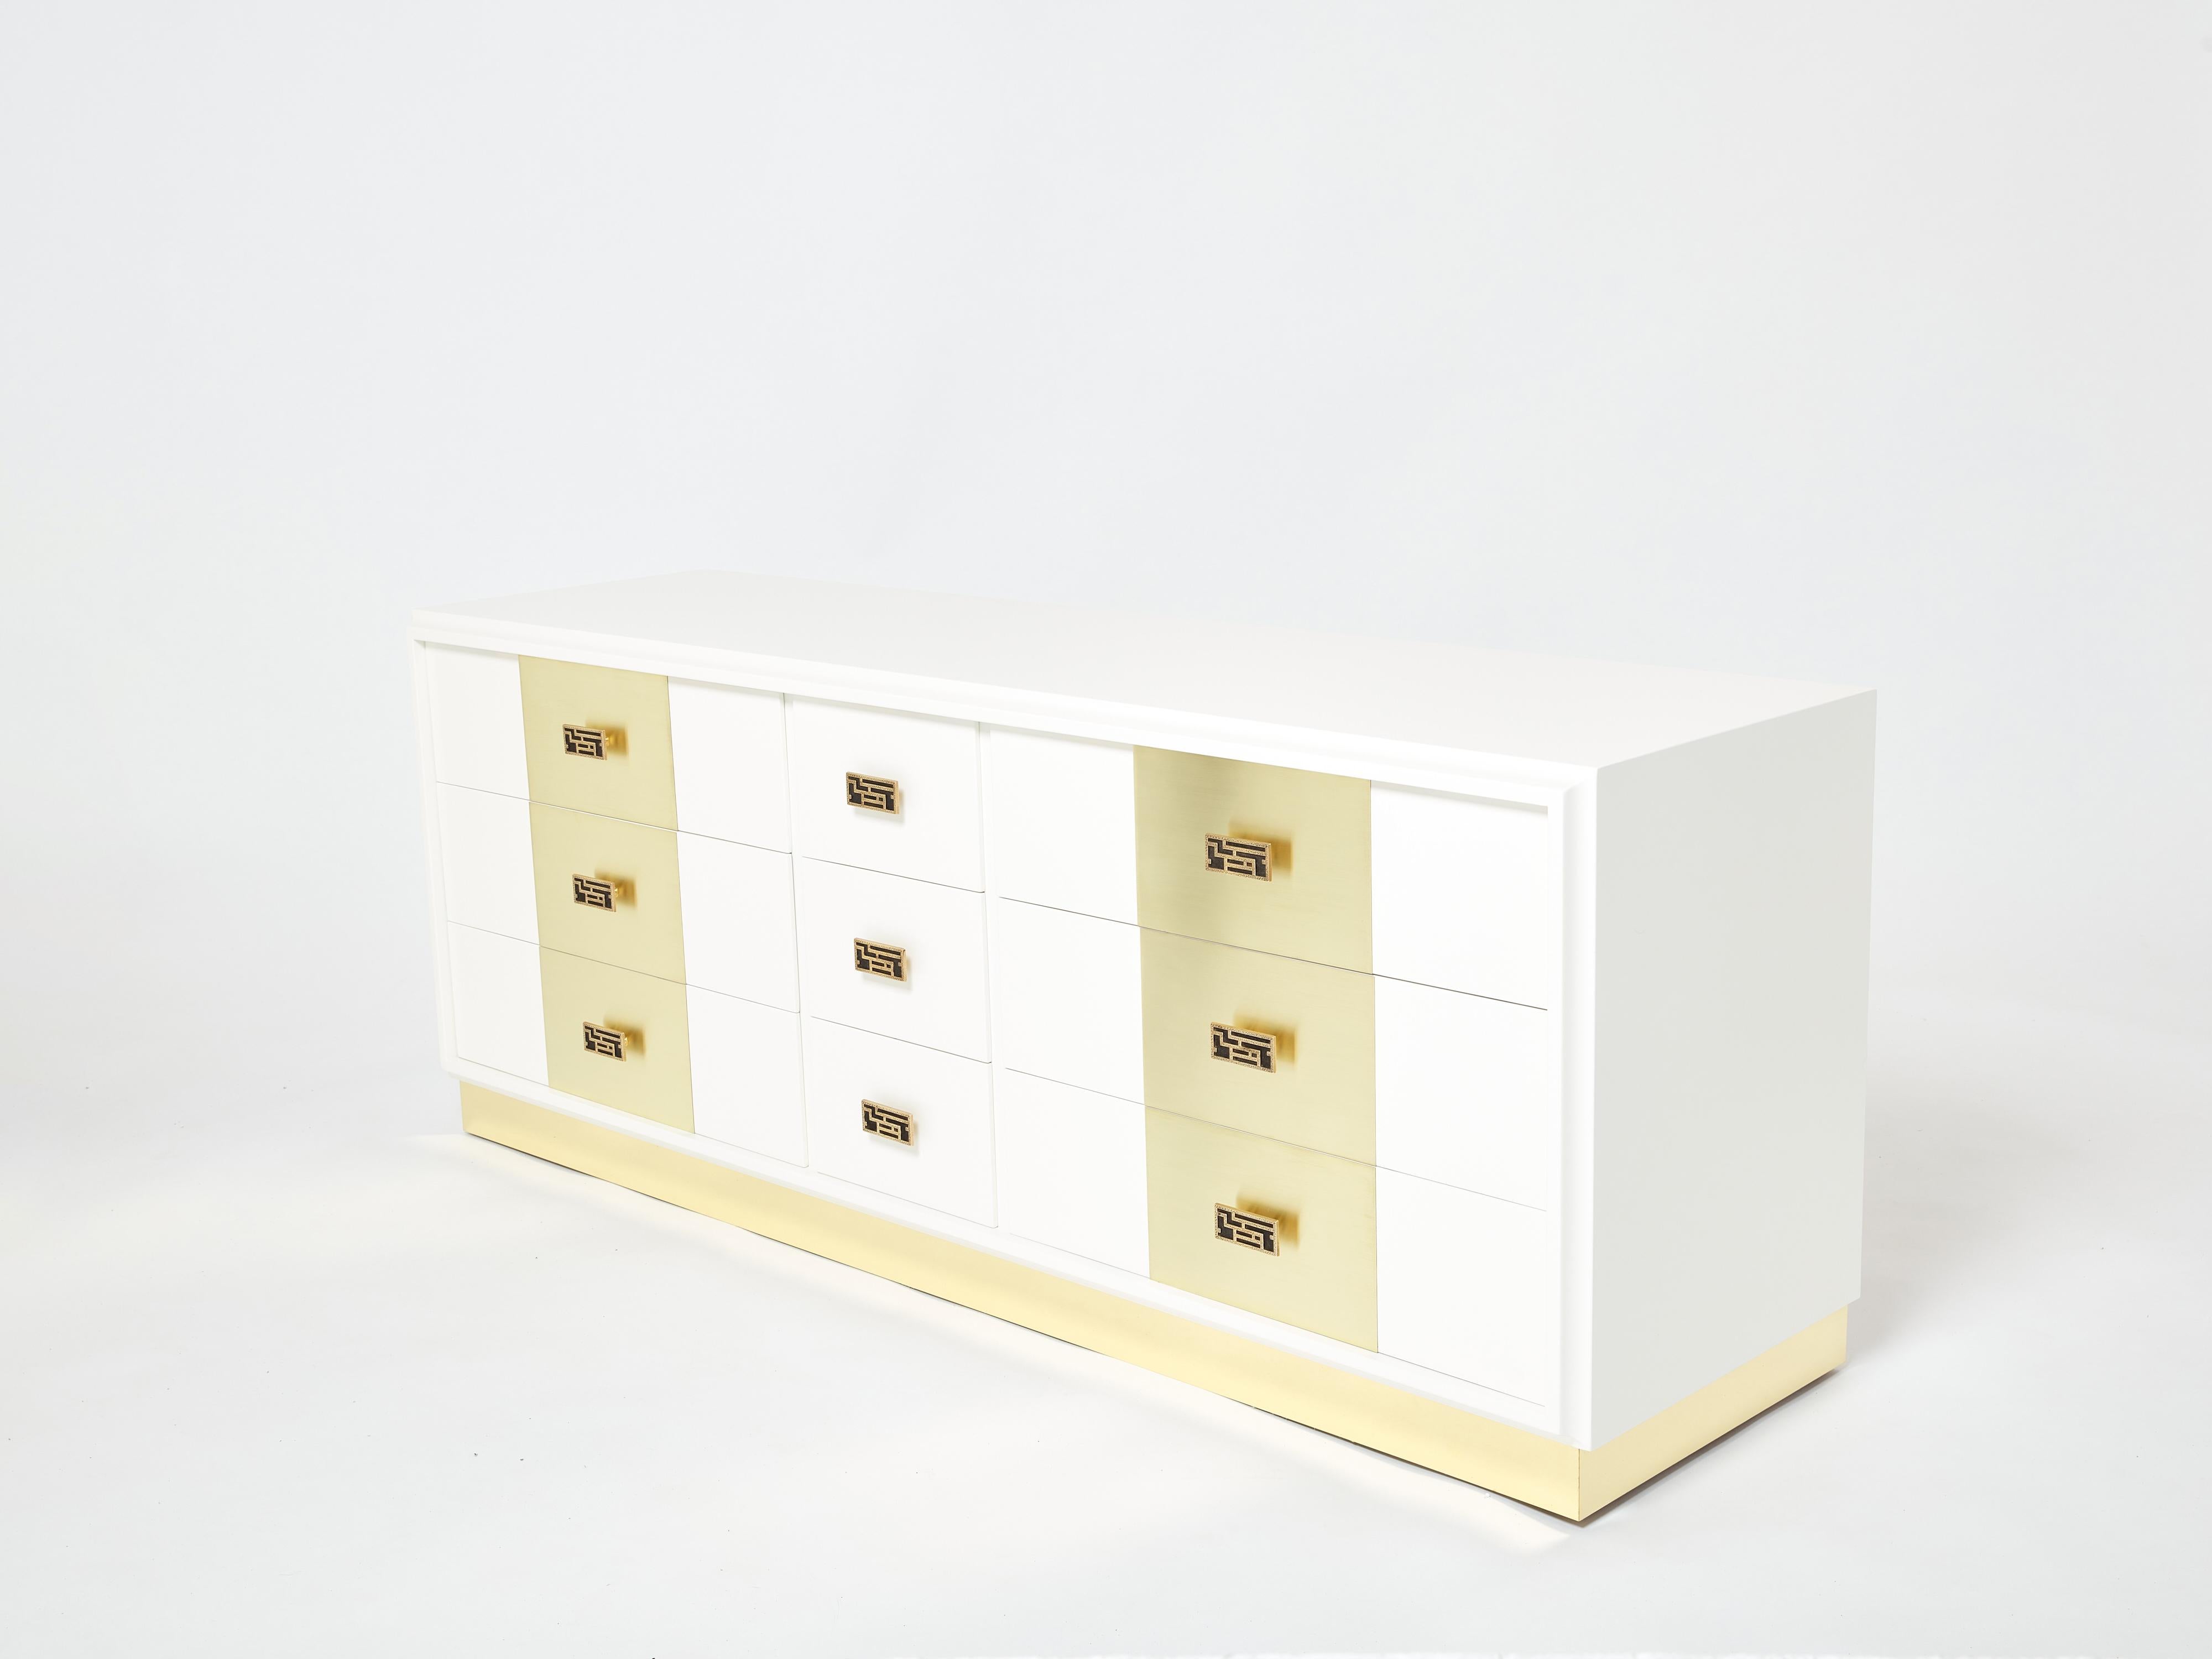 This rare Italian Mid-Century off white lacquered commode would be stunning in any bedroom. Designed by Luciano Frigerio for Frigerio Di Desio in Italy in the late 1970s, the satin off white lacquer paired with the mix of polished and brushed brass